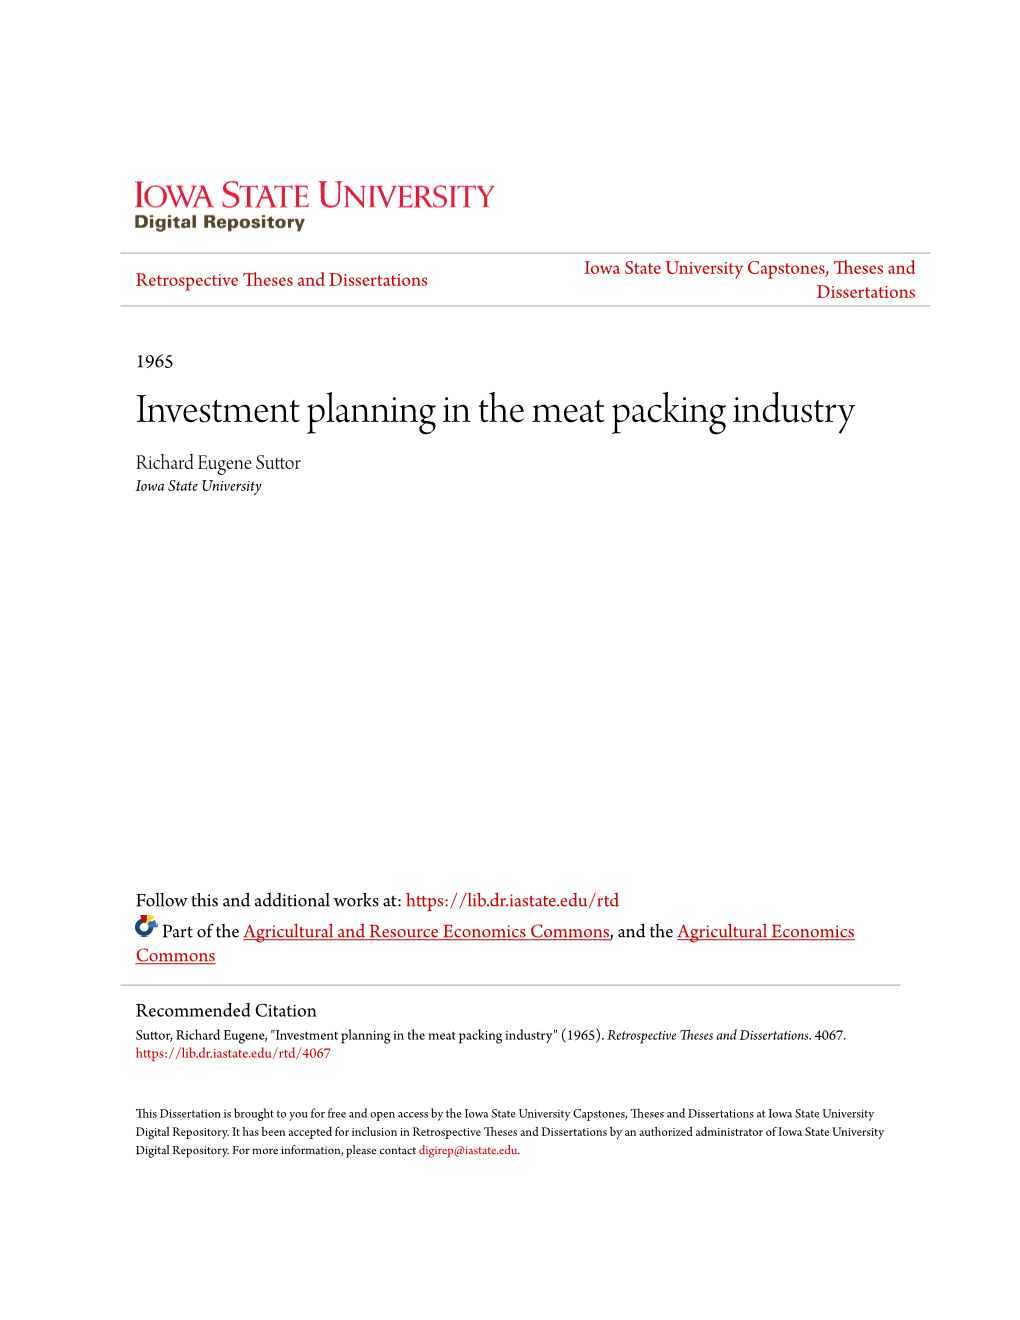 Investment Planning in the Meat Packing Industry Richard Eugene Suttor Iowa State University